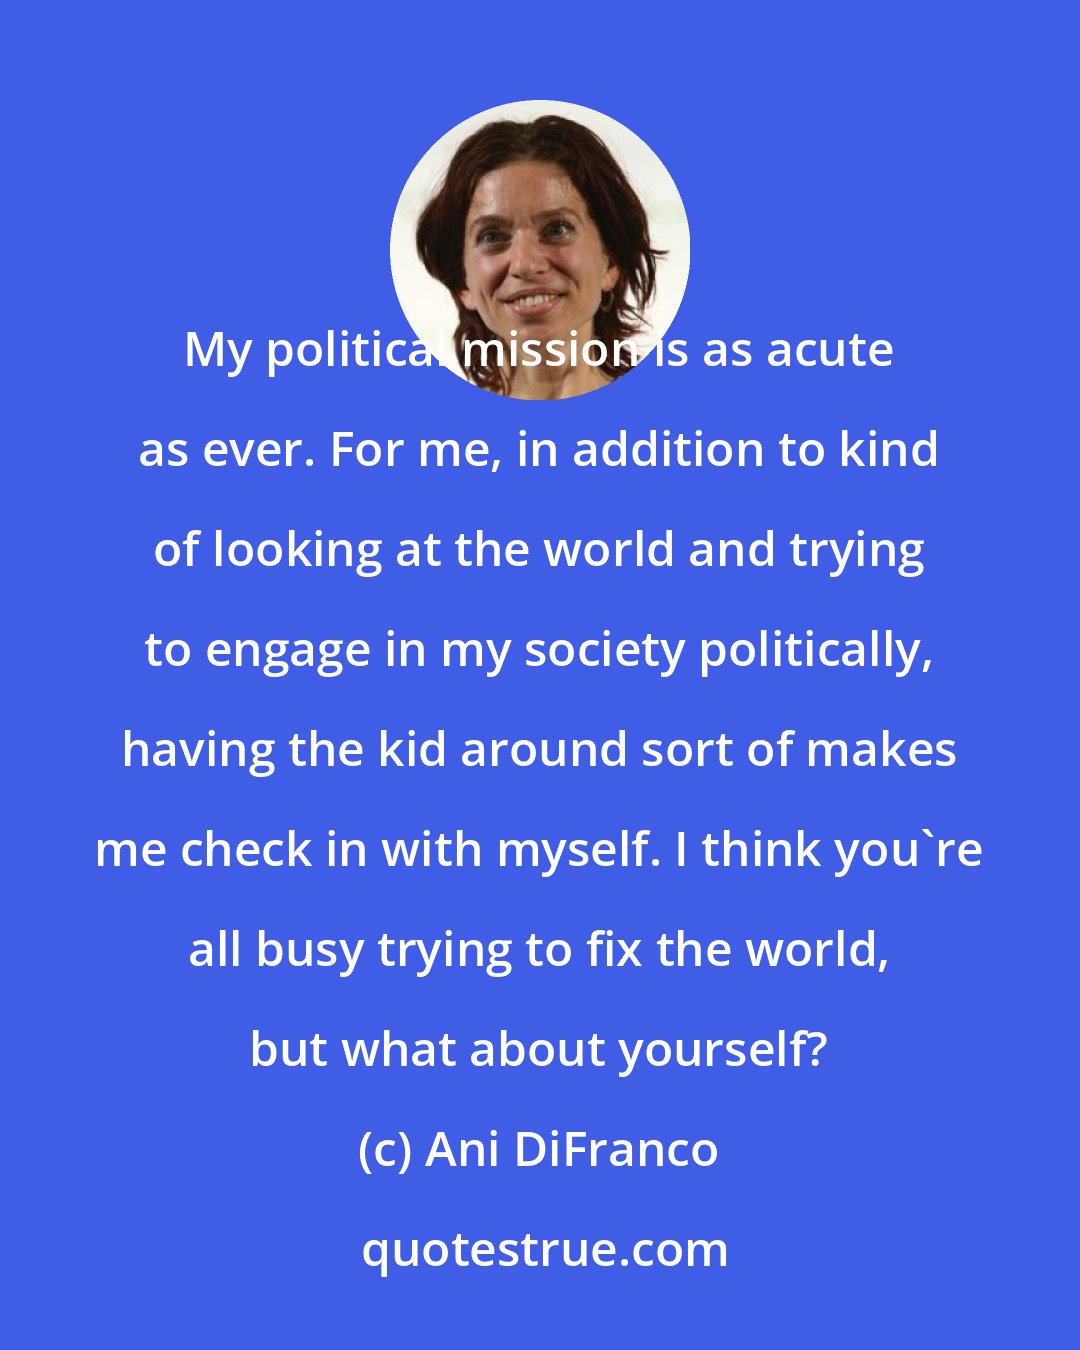 Ani DiFranco: My political mission is as acute as ever. For me, in addition to kind of looking at the world and trying to engage in my society politically, having the kid around sort of makes me check in with myself. I think you're all busy trying to fix the world, but what about yourself?